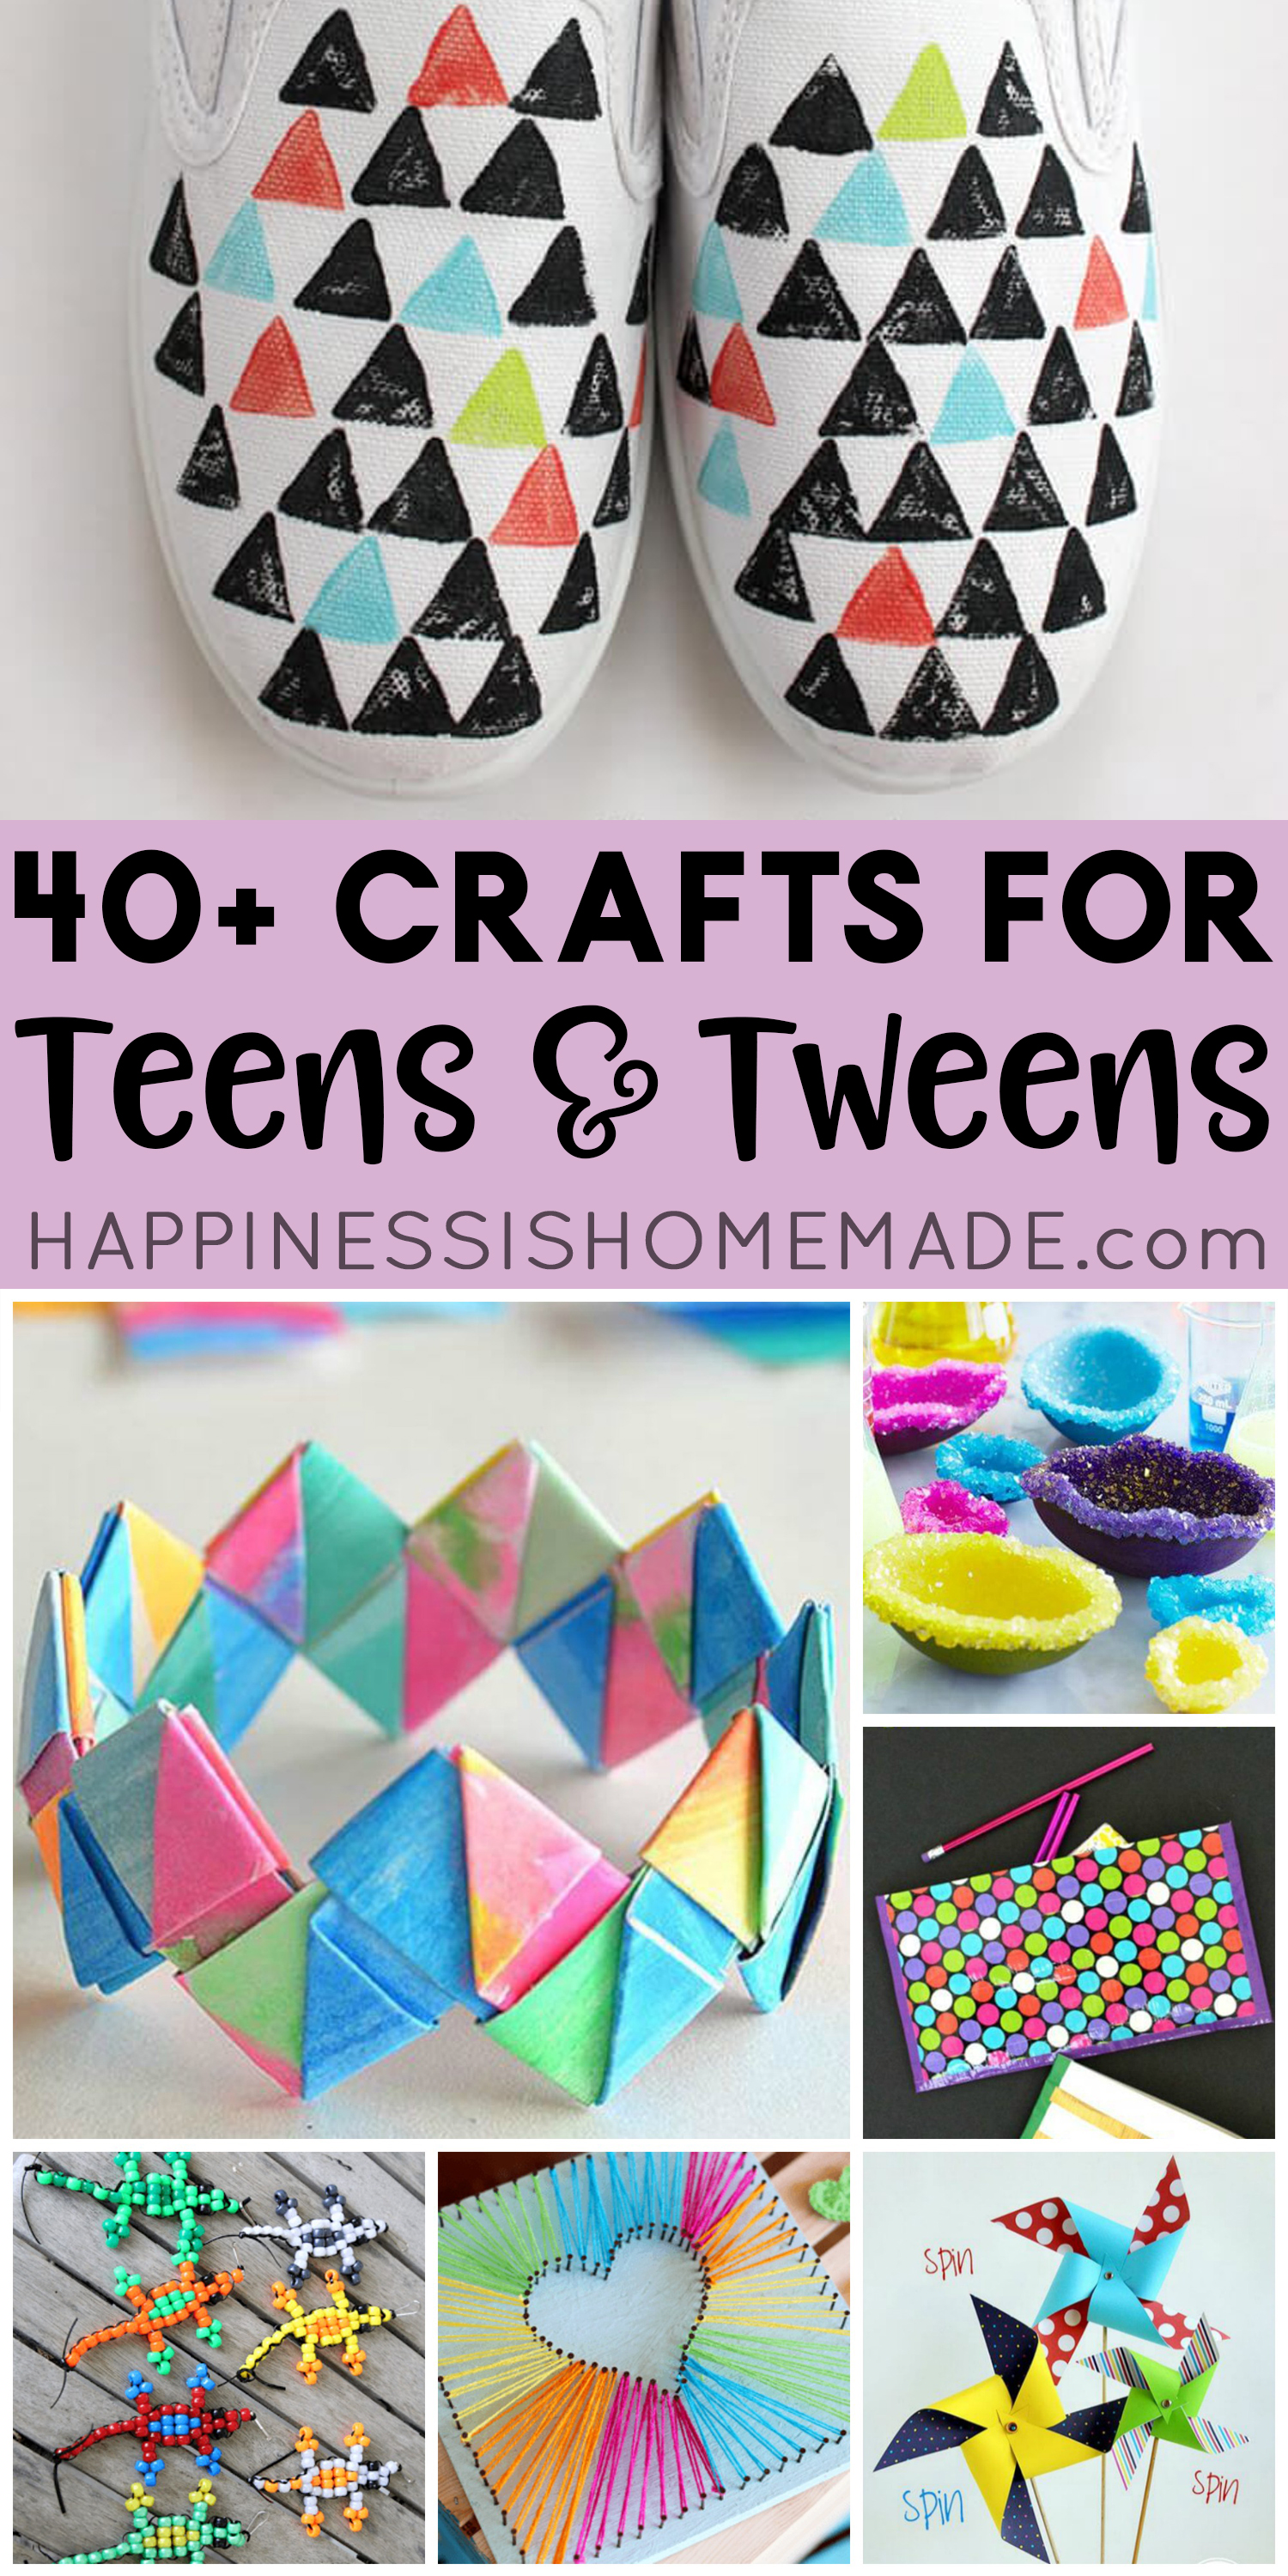 Fun Crafts for 12-Year-Olds · Craftwhack